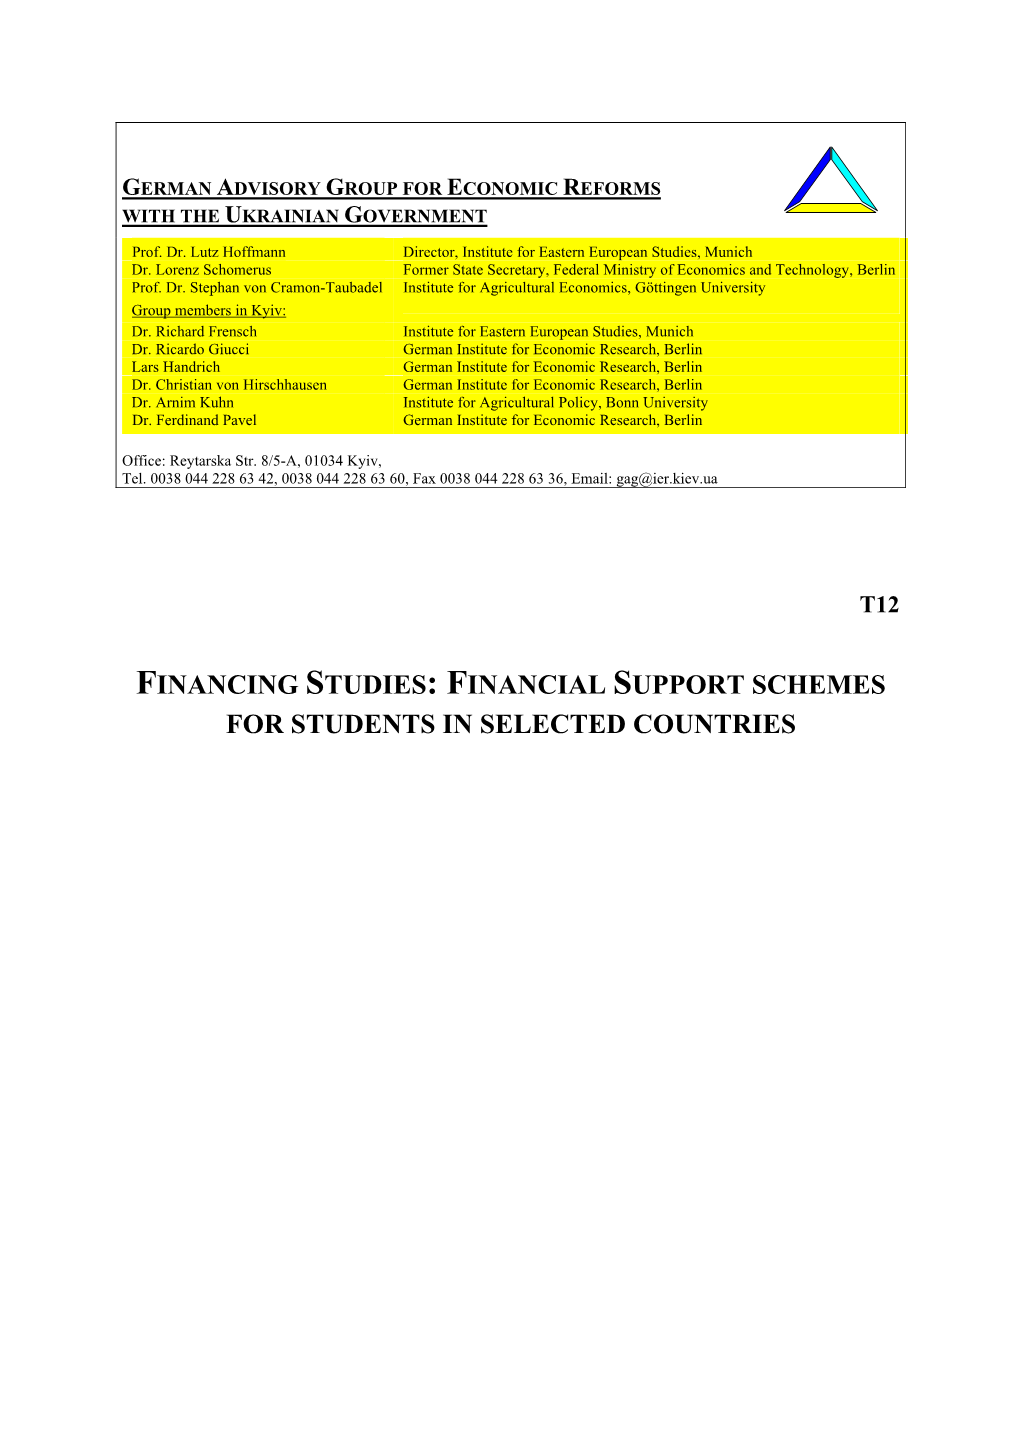 Financing Studies: Financial Support Schemes for Students in Selected Countries